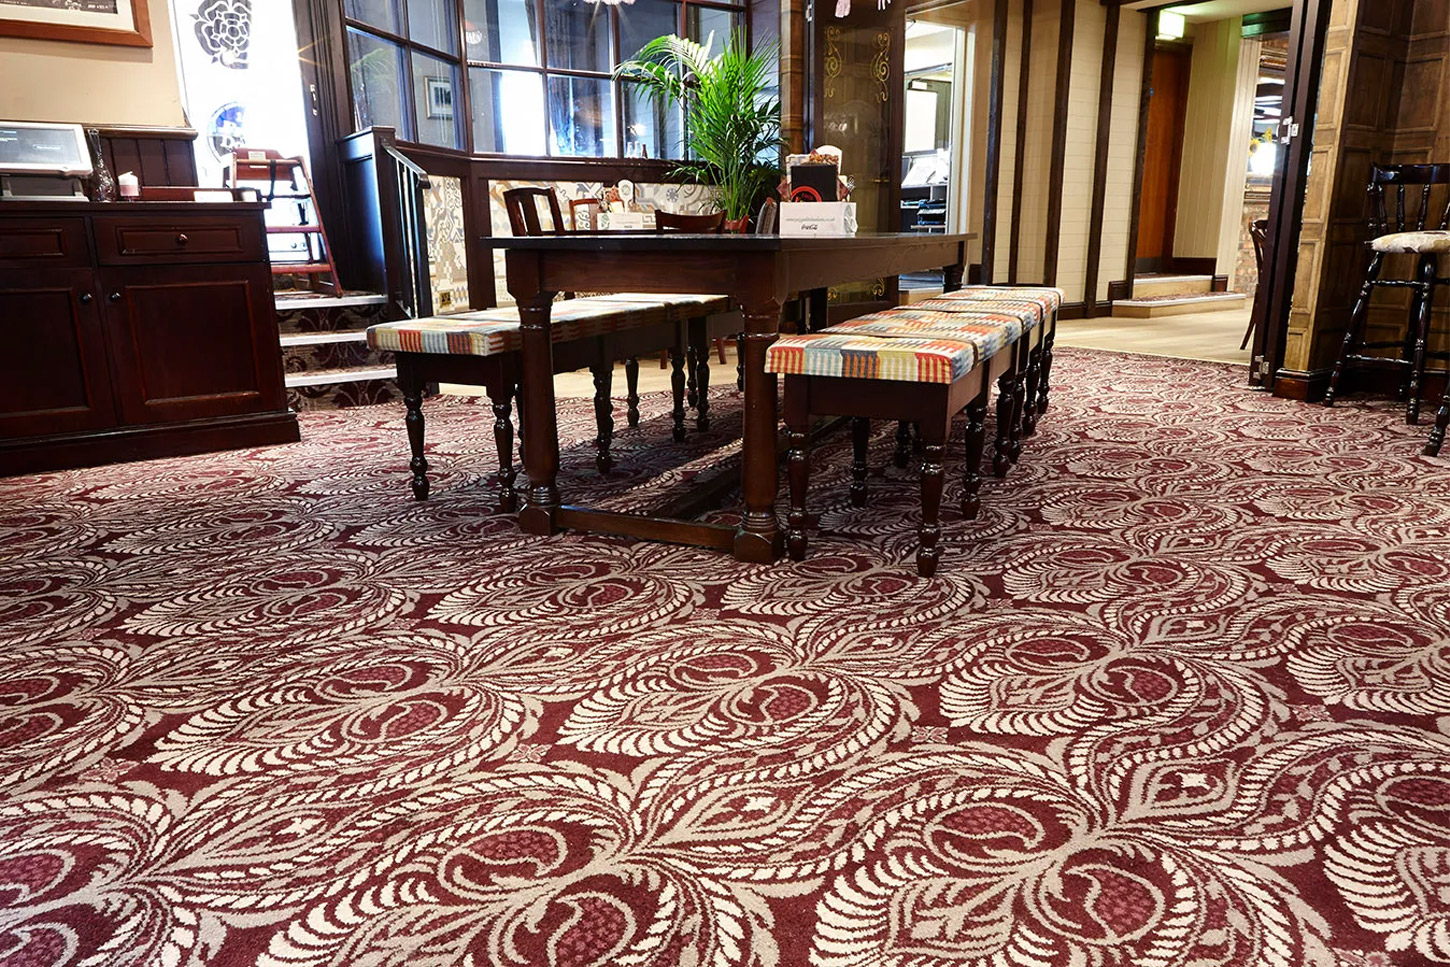 A dark red hotel carpet, designed by Wilton Carpets with white plant-like patterns